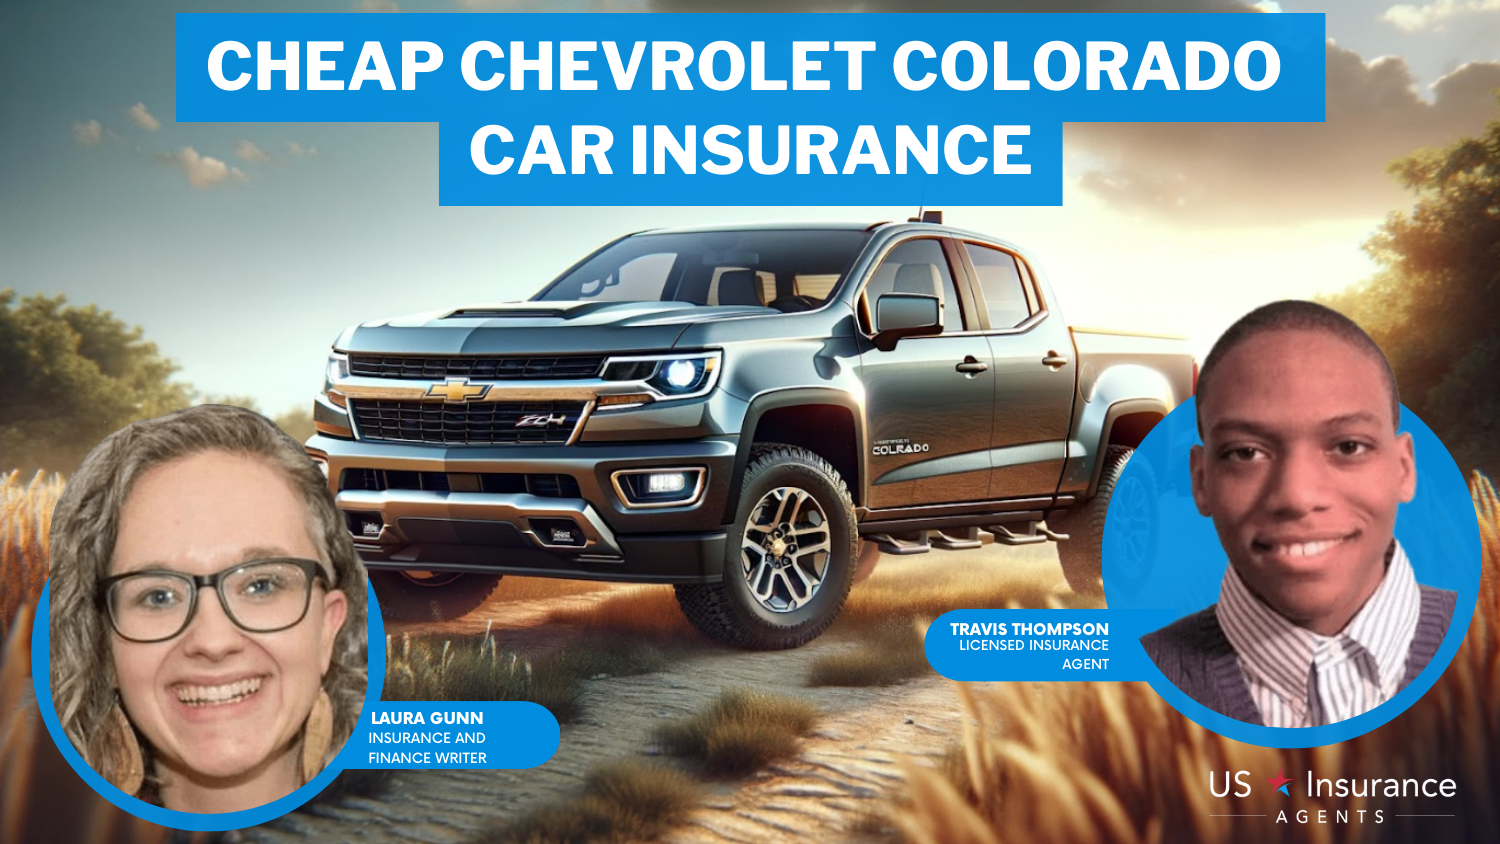 Cheap Chevrolet Colorado Car Insurance: Farmers, Travelers, and Nationwide